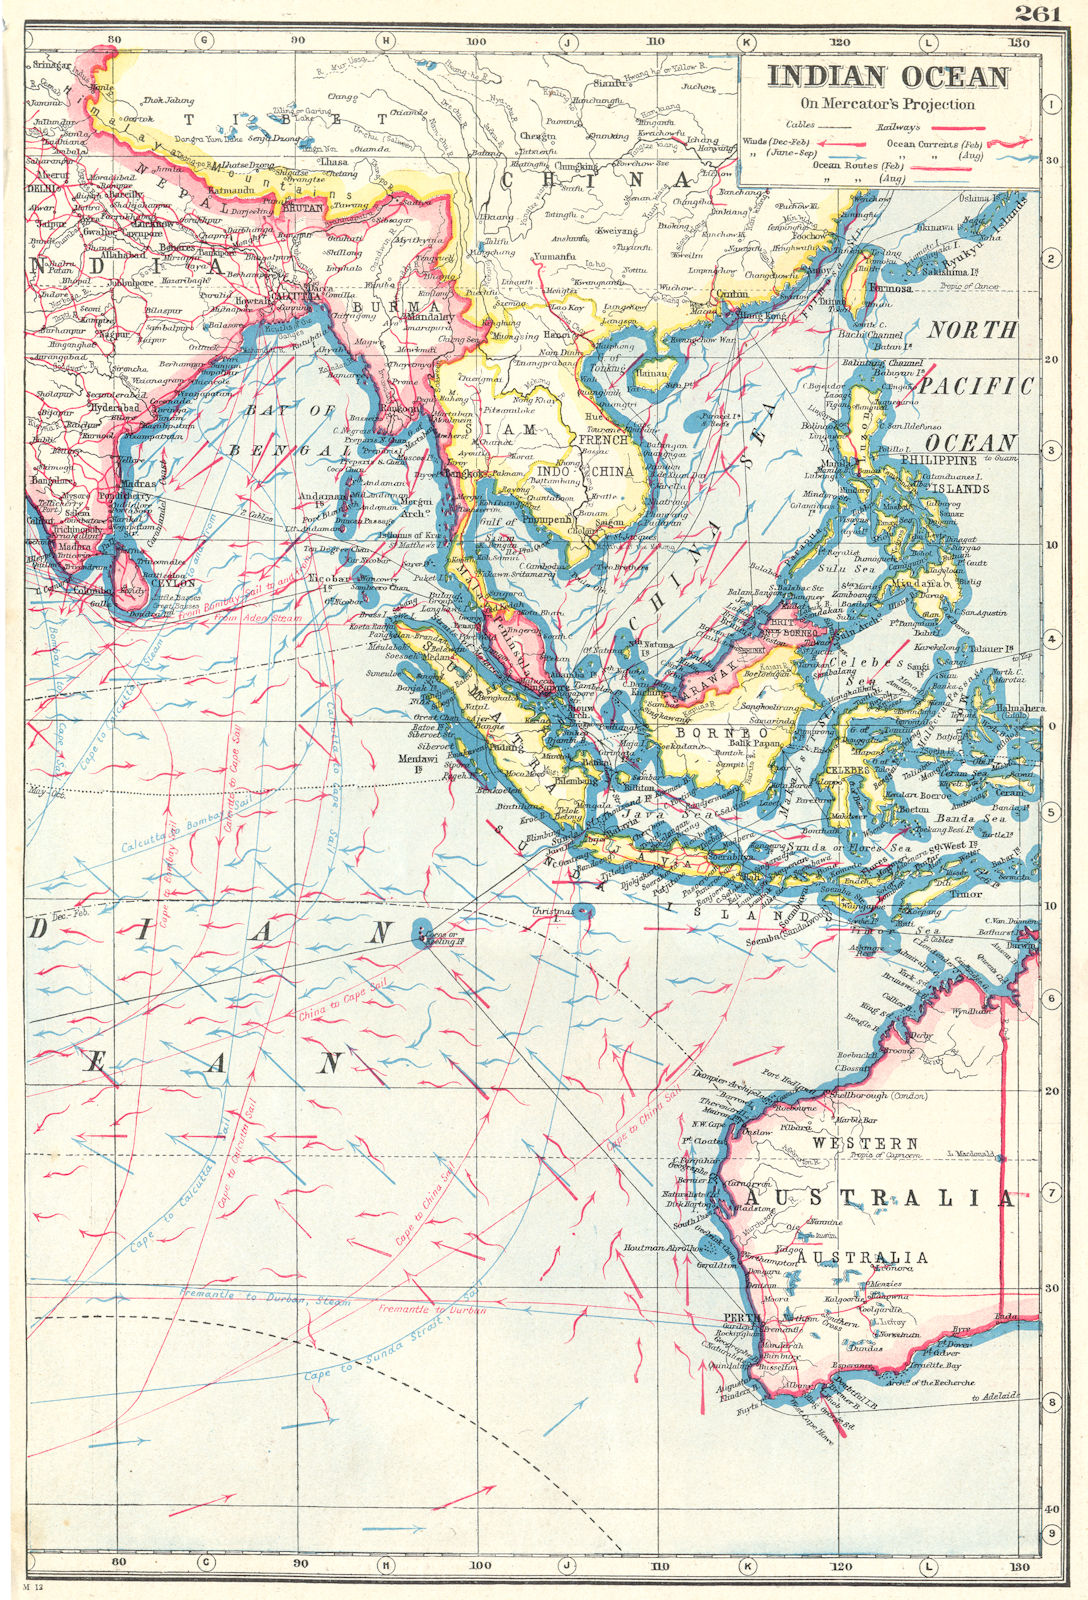 INDIAN OCEAN EAST. East Indies. Shows winds & ocean currents 1920 old map